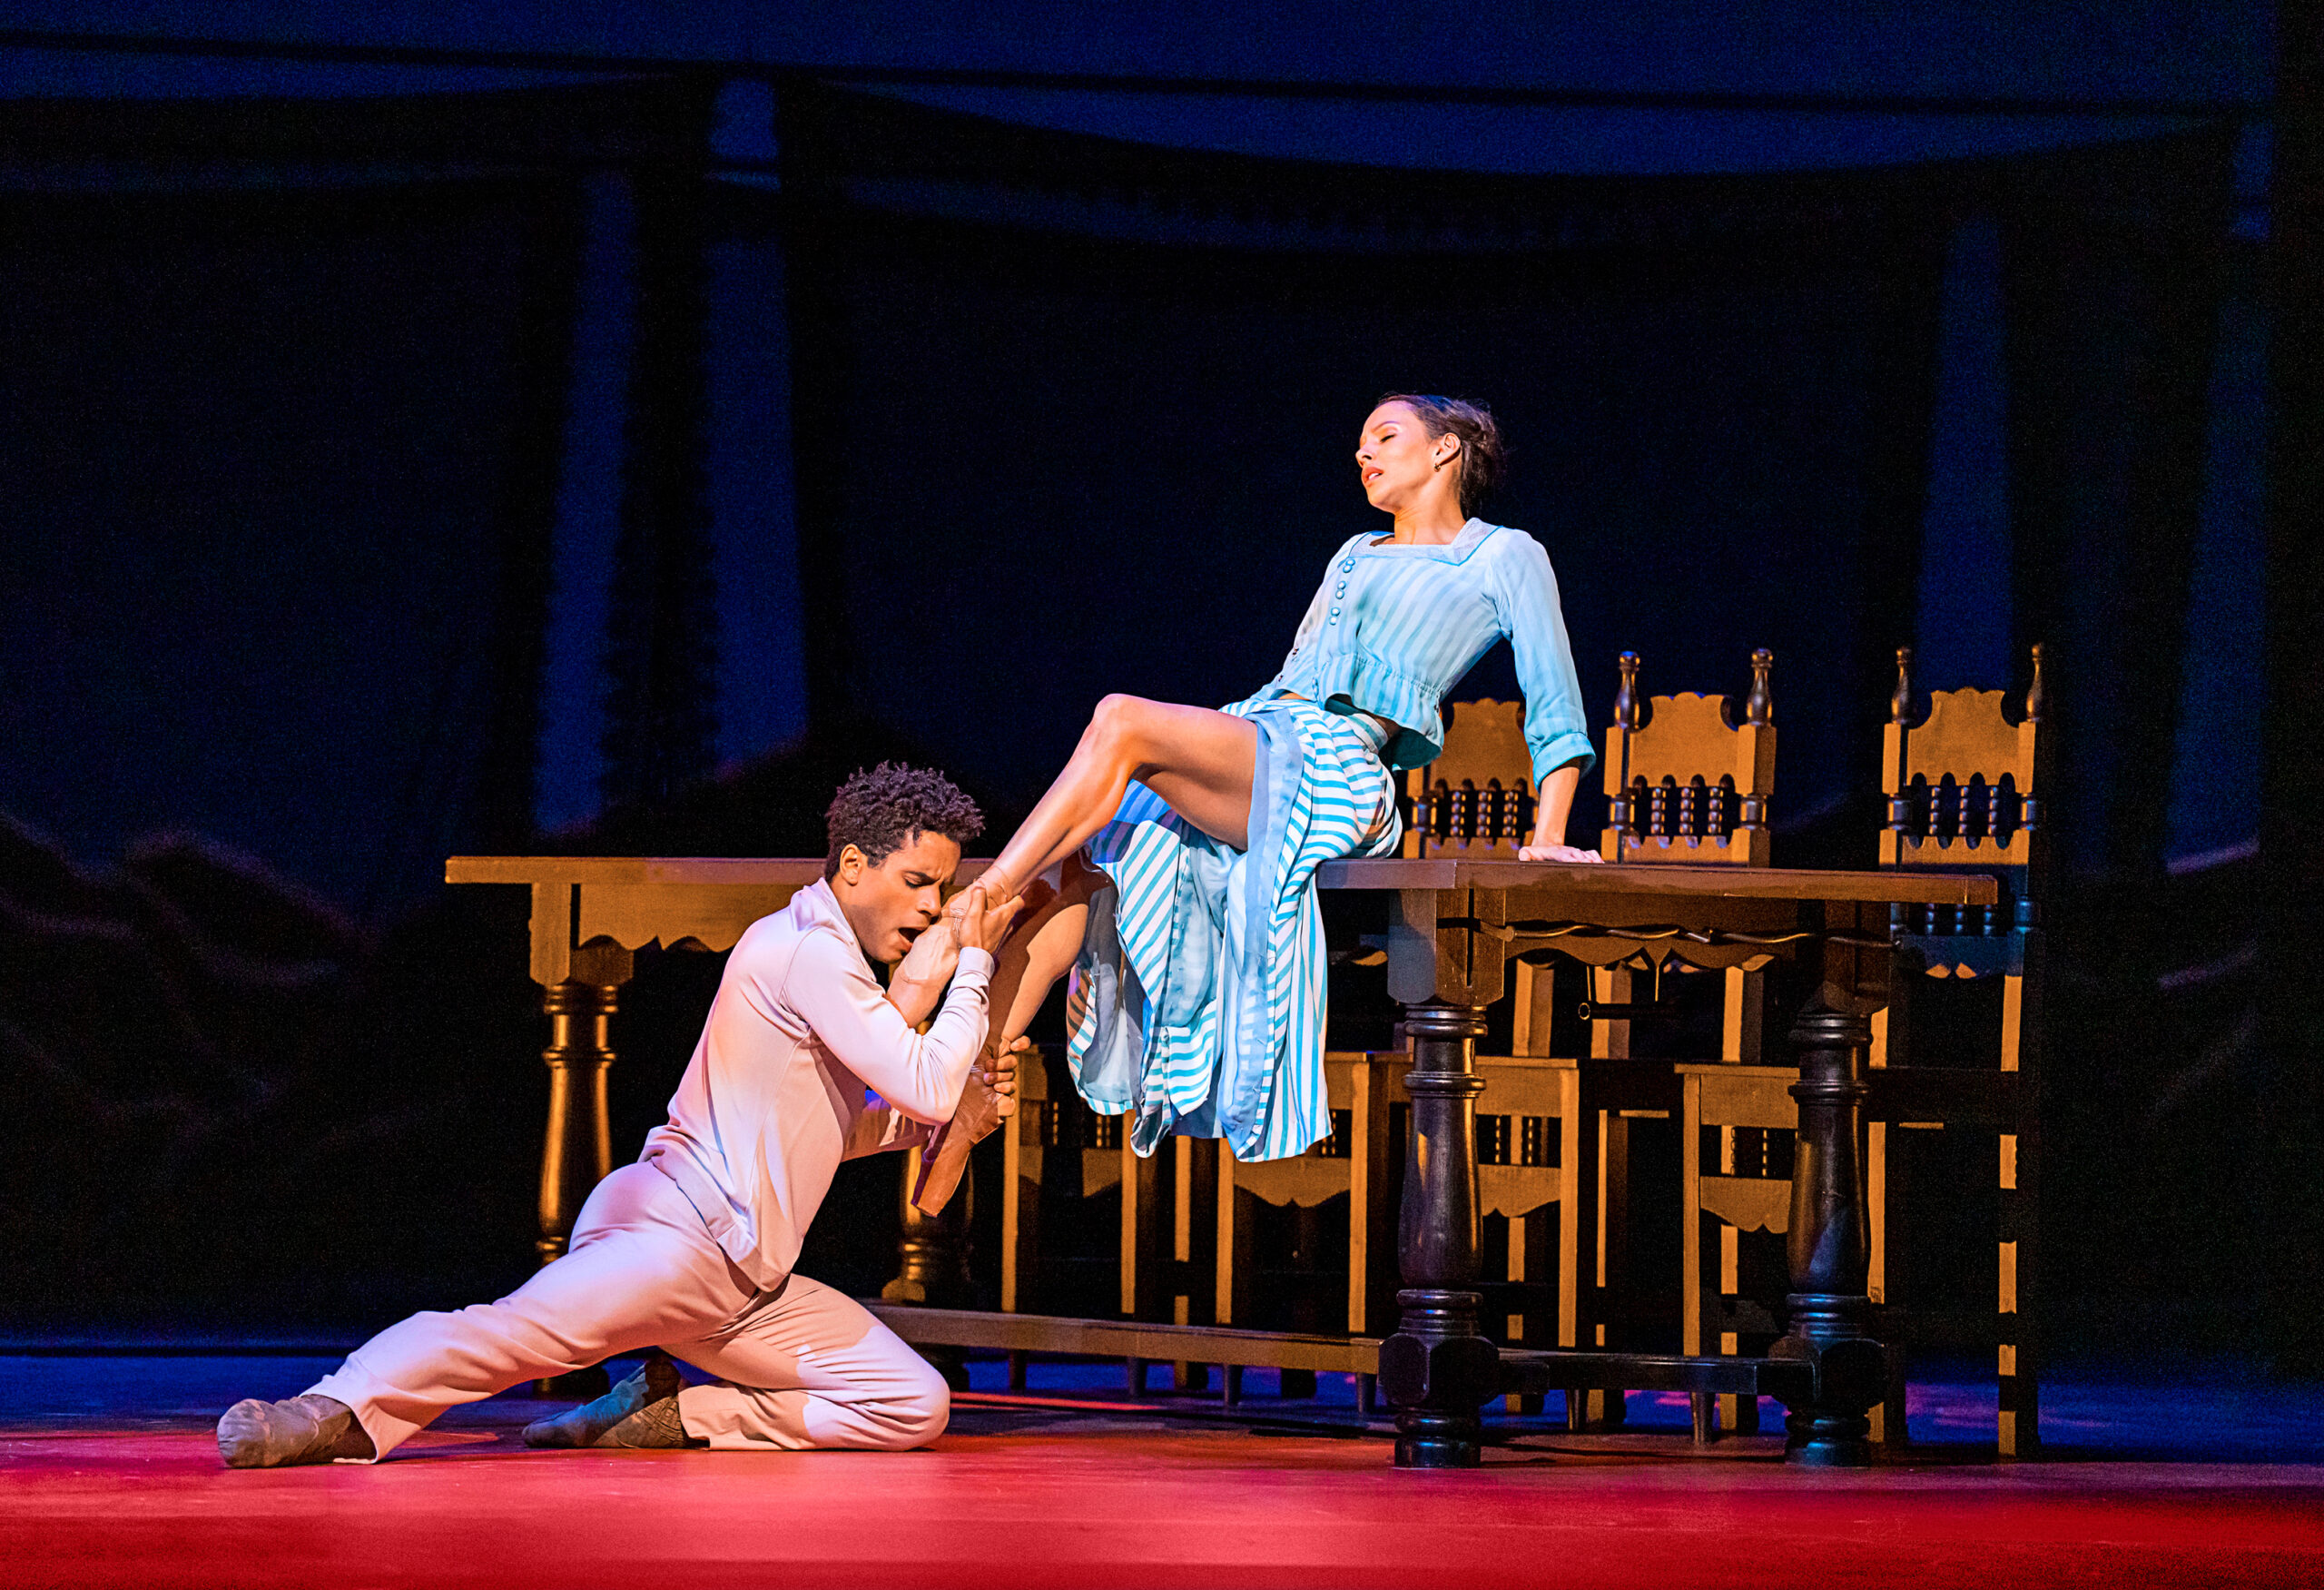 Marcelino Sambé and Francesca Hayward in performance. Sambé kneels as he desperately cradles one of Hayward's feet to his face. Hayward, seated on a kitchen table, leans back on her hands, eyes closed in tension and pleasure. Her long, blue and white striped skirt slips up her thighs.